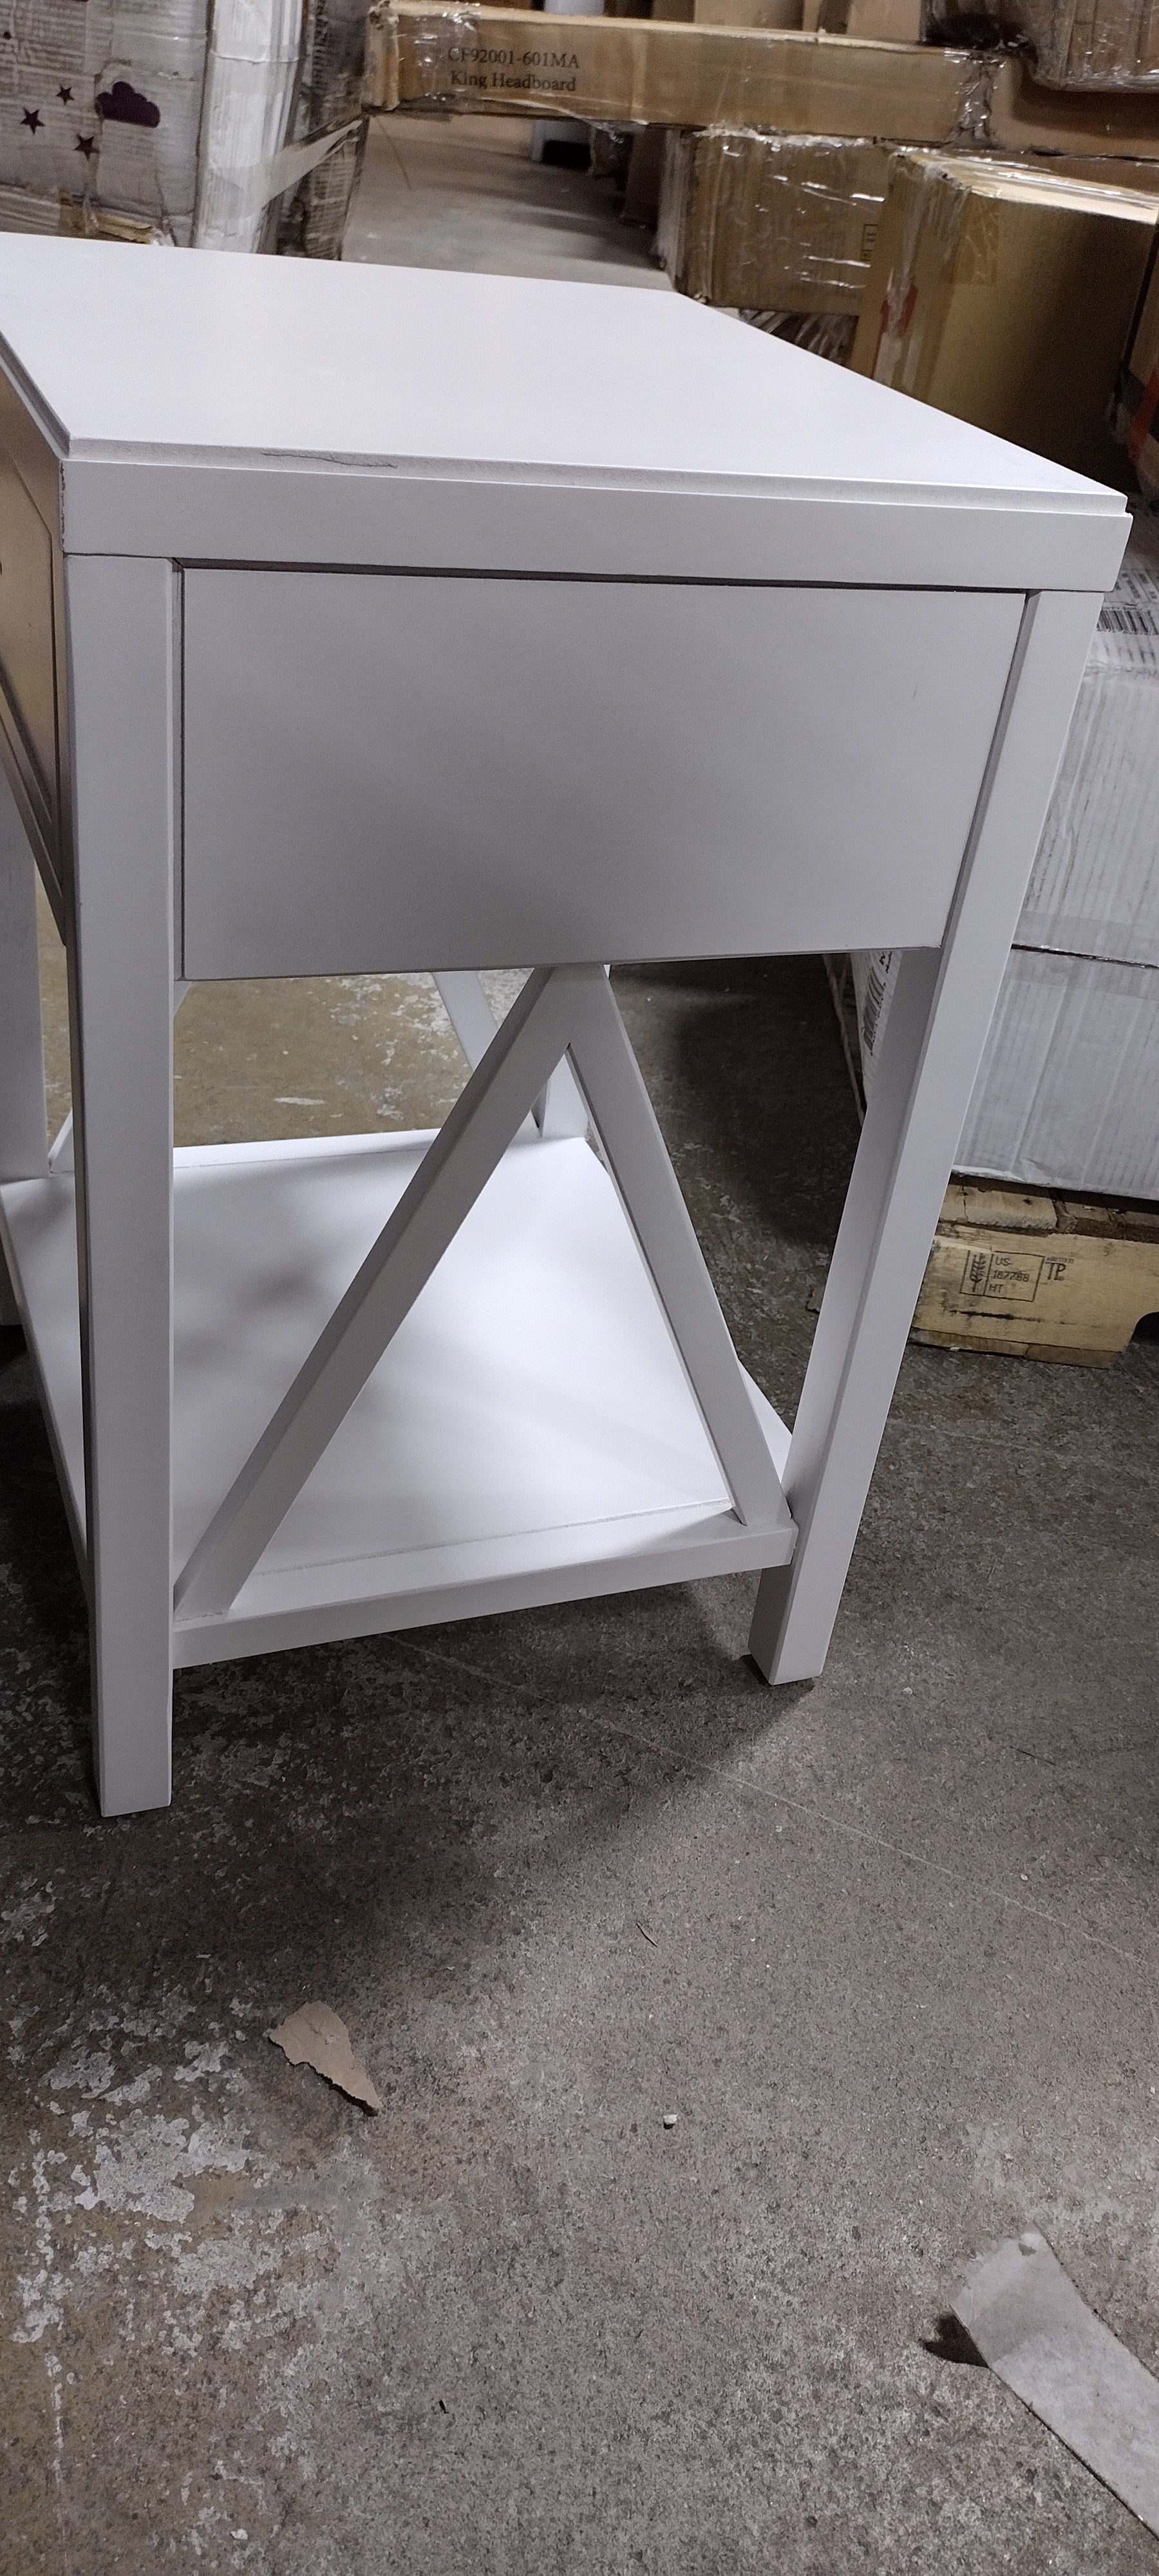 Nadeau Solid + Manufactured Wood Nightstand